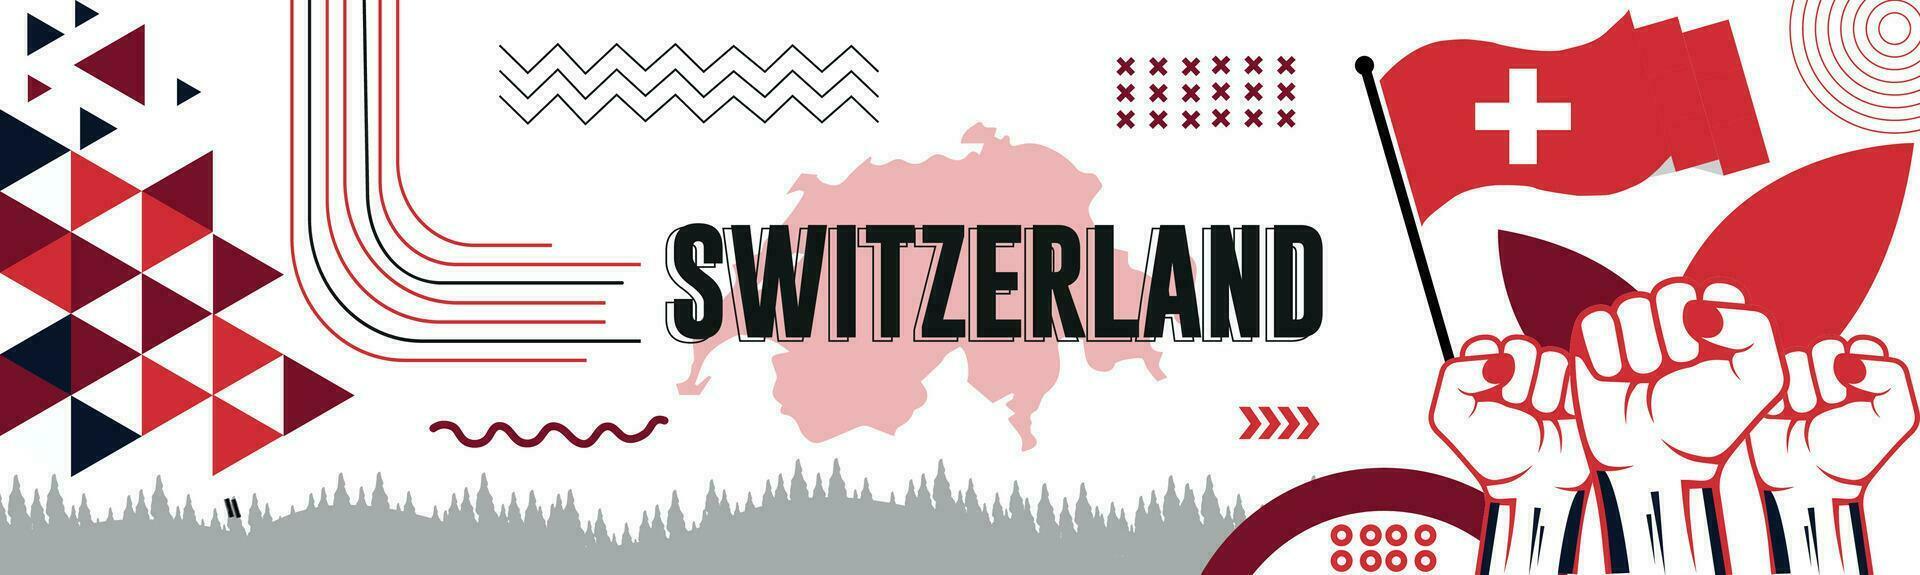 SWITZERLAND Map and raised fists. National day or Independence day design for SWITZERLAND celebration. Modern retro design with abstract icons. Vector illustration.